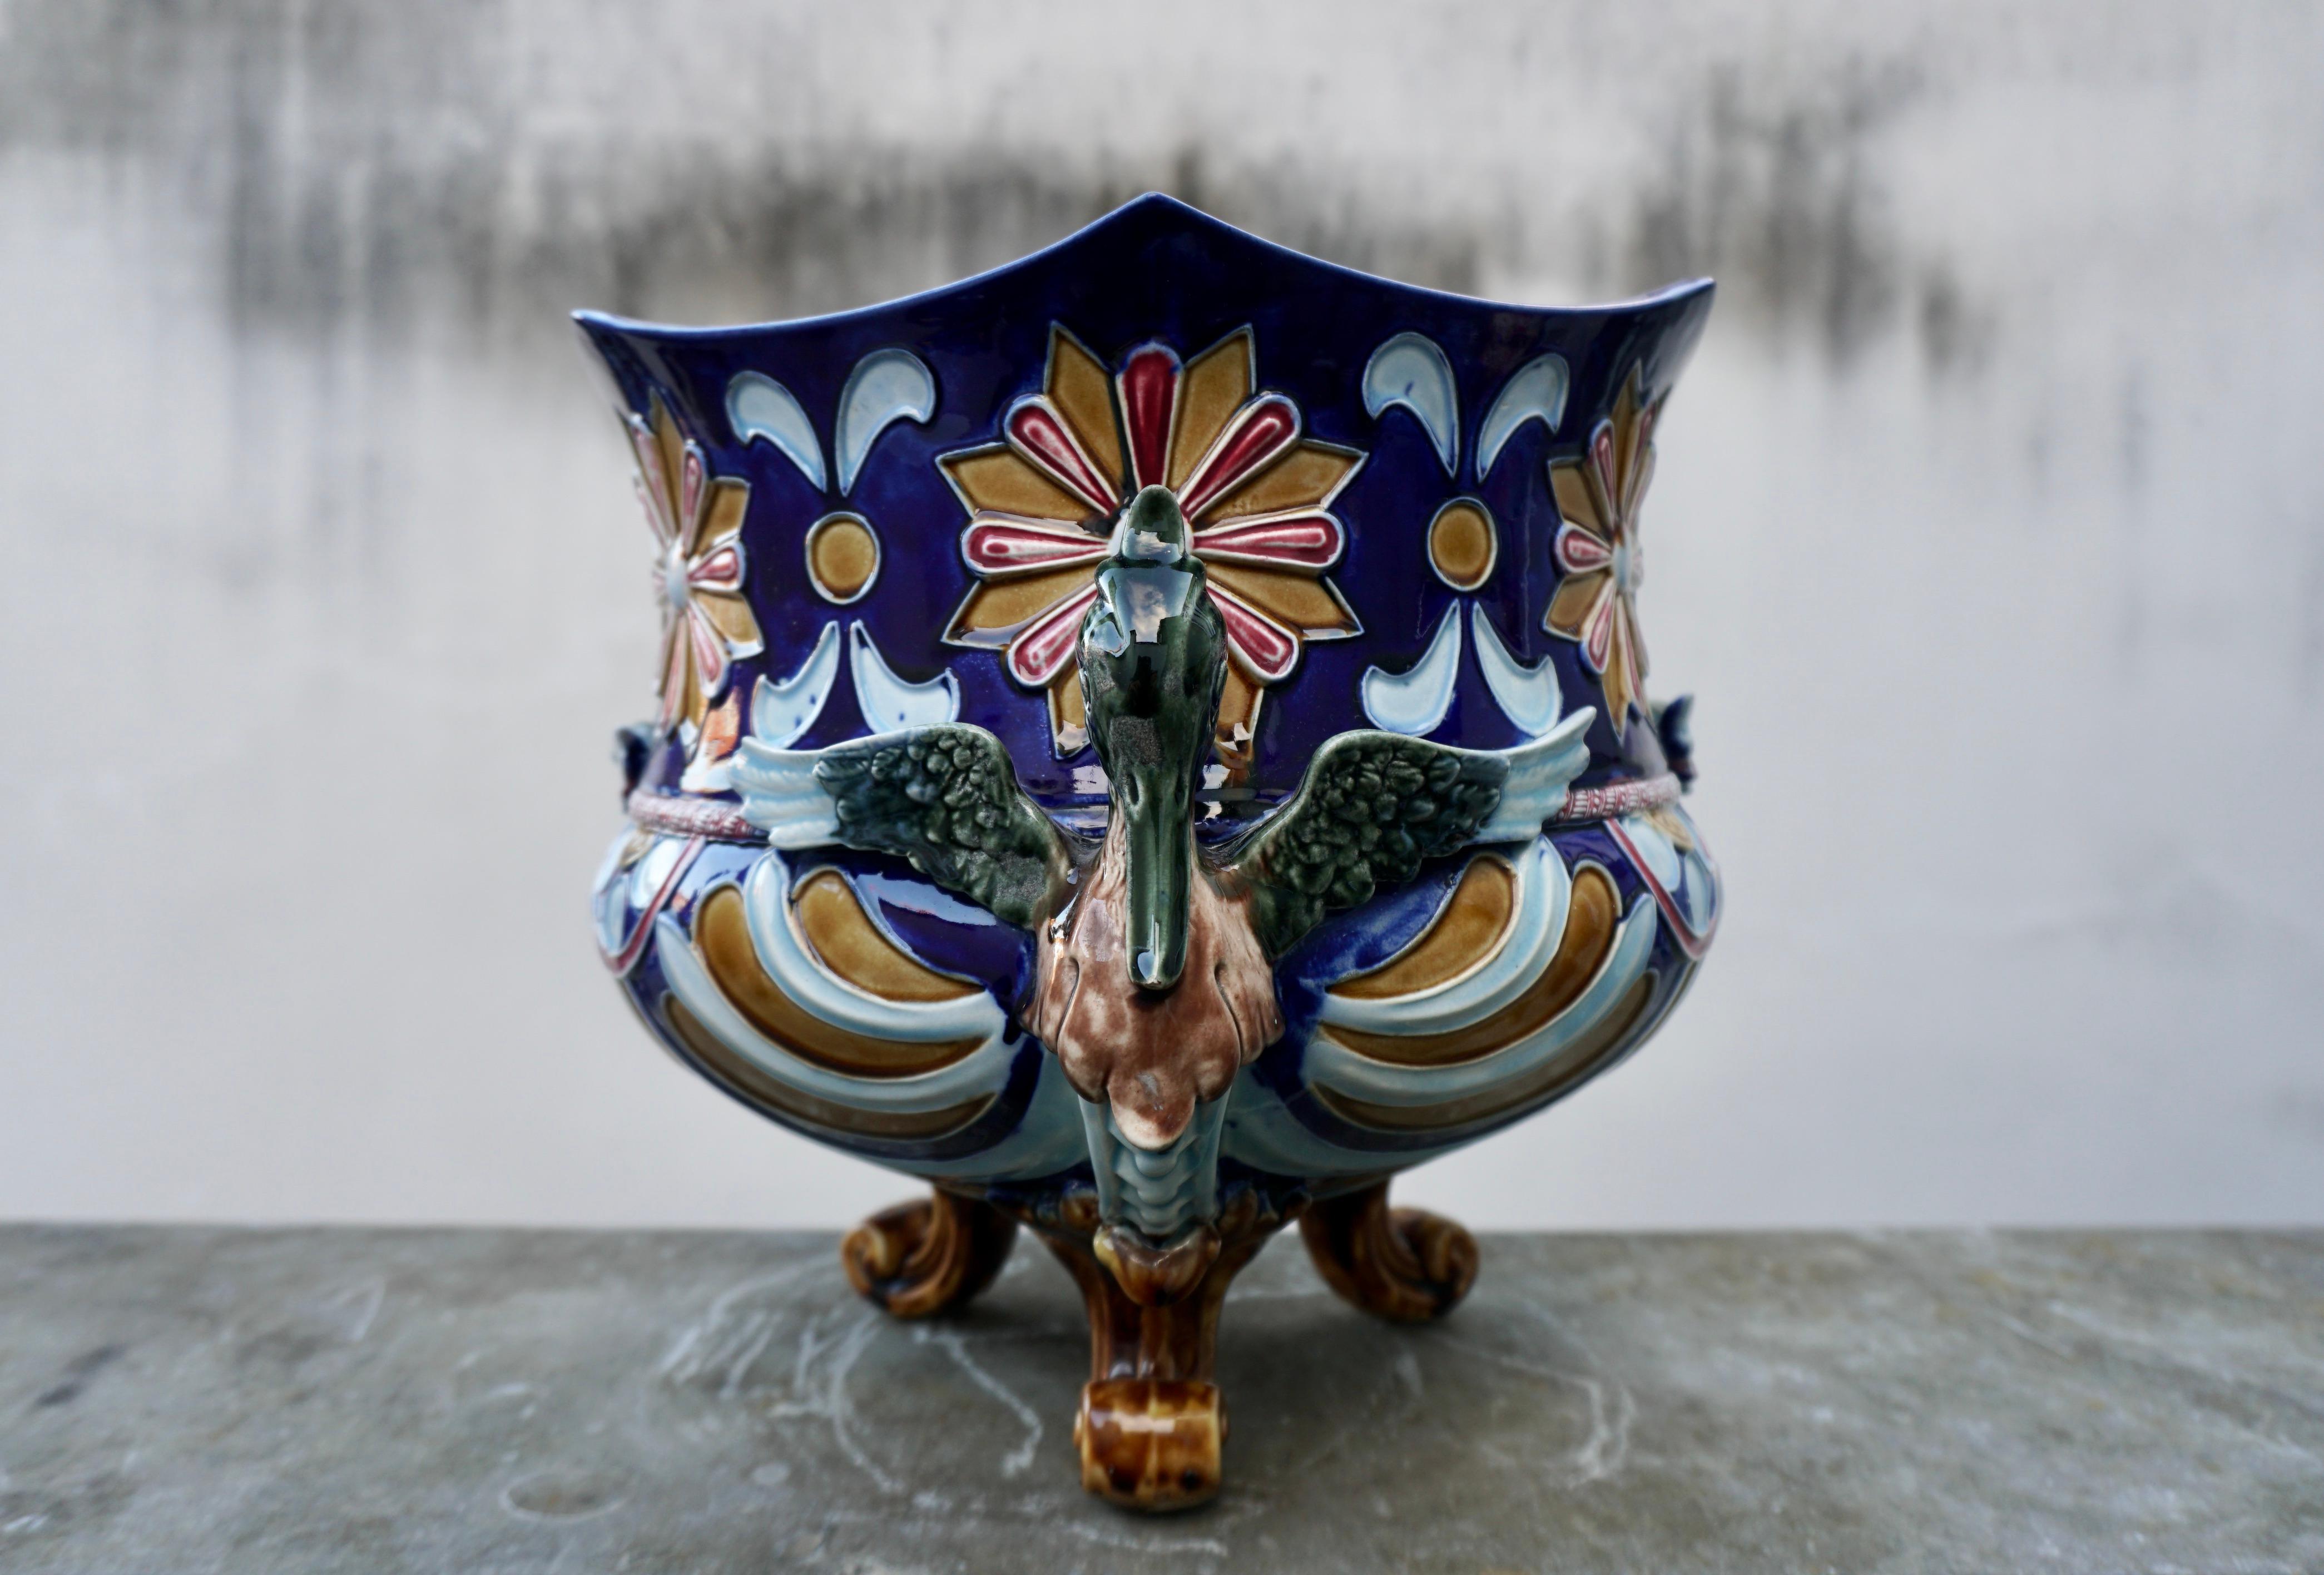 Rare Antique French Majolica Planter Jardiniere with Winged Griffins and Flowers In Good Condition For Sale In Antwerp, BE